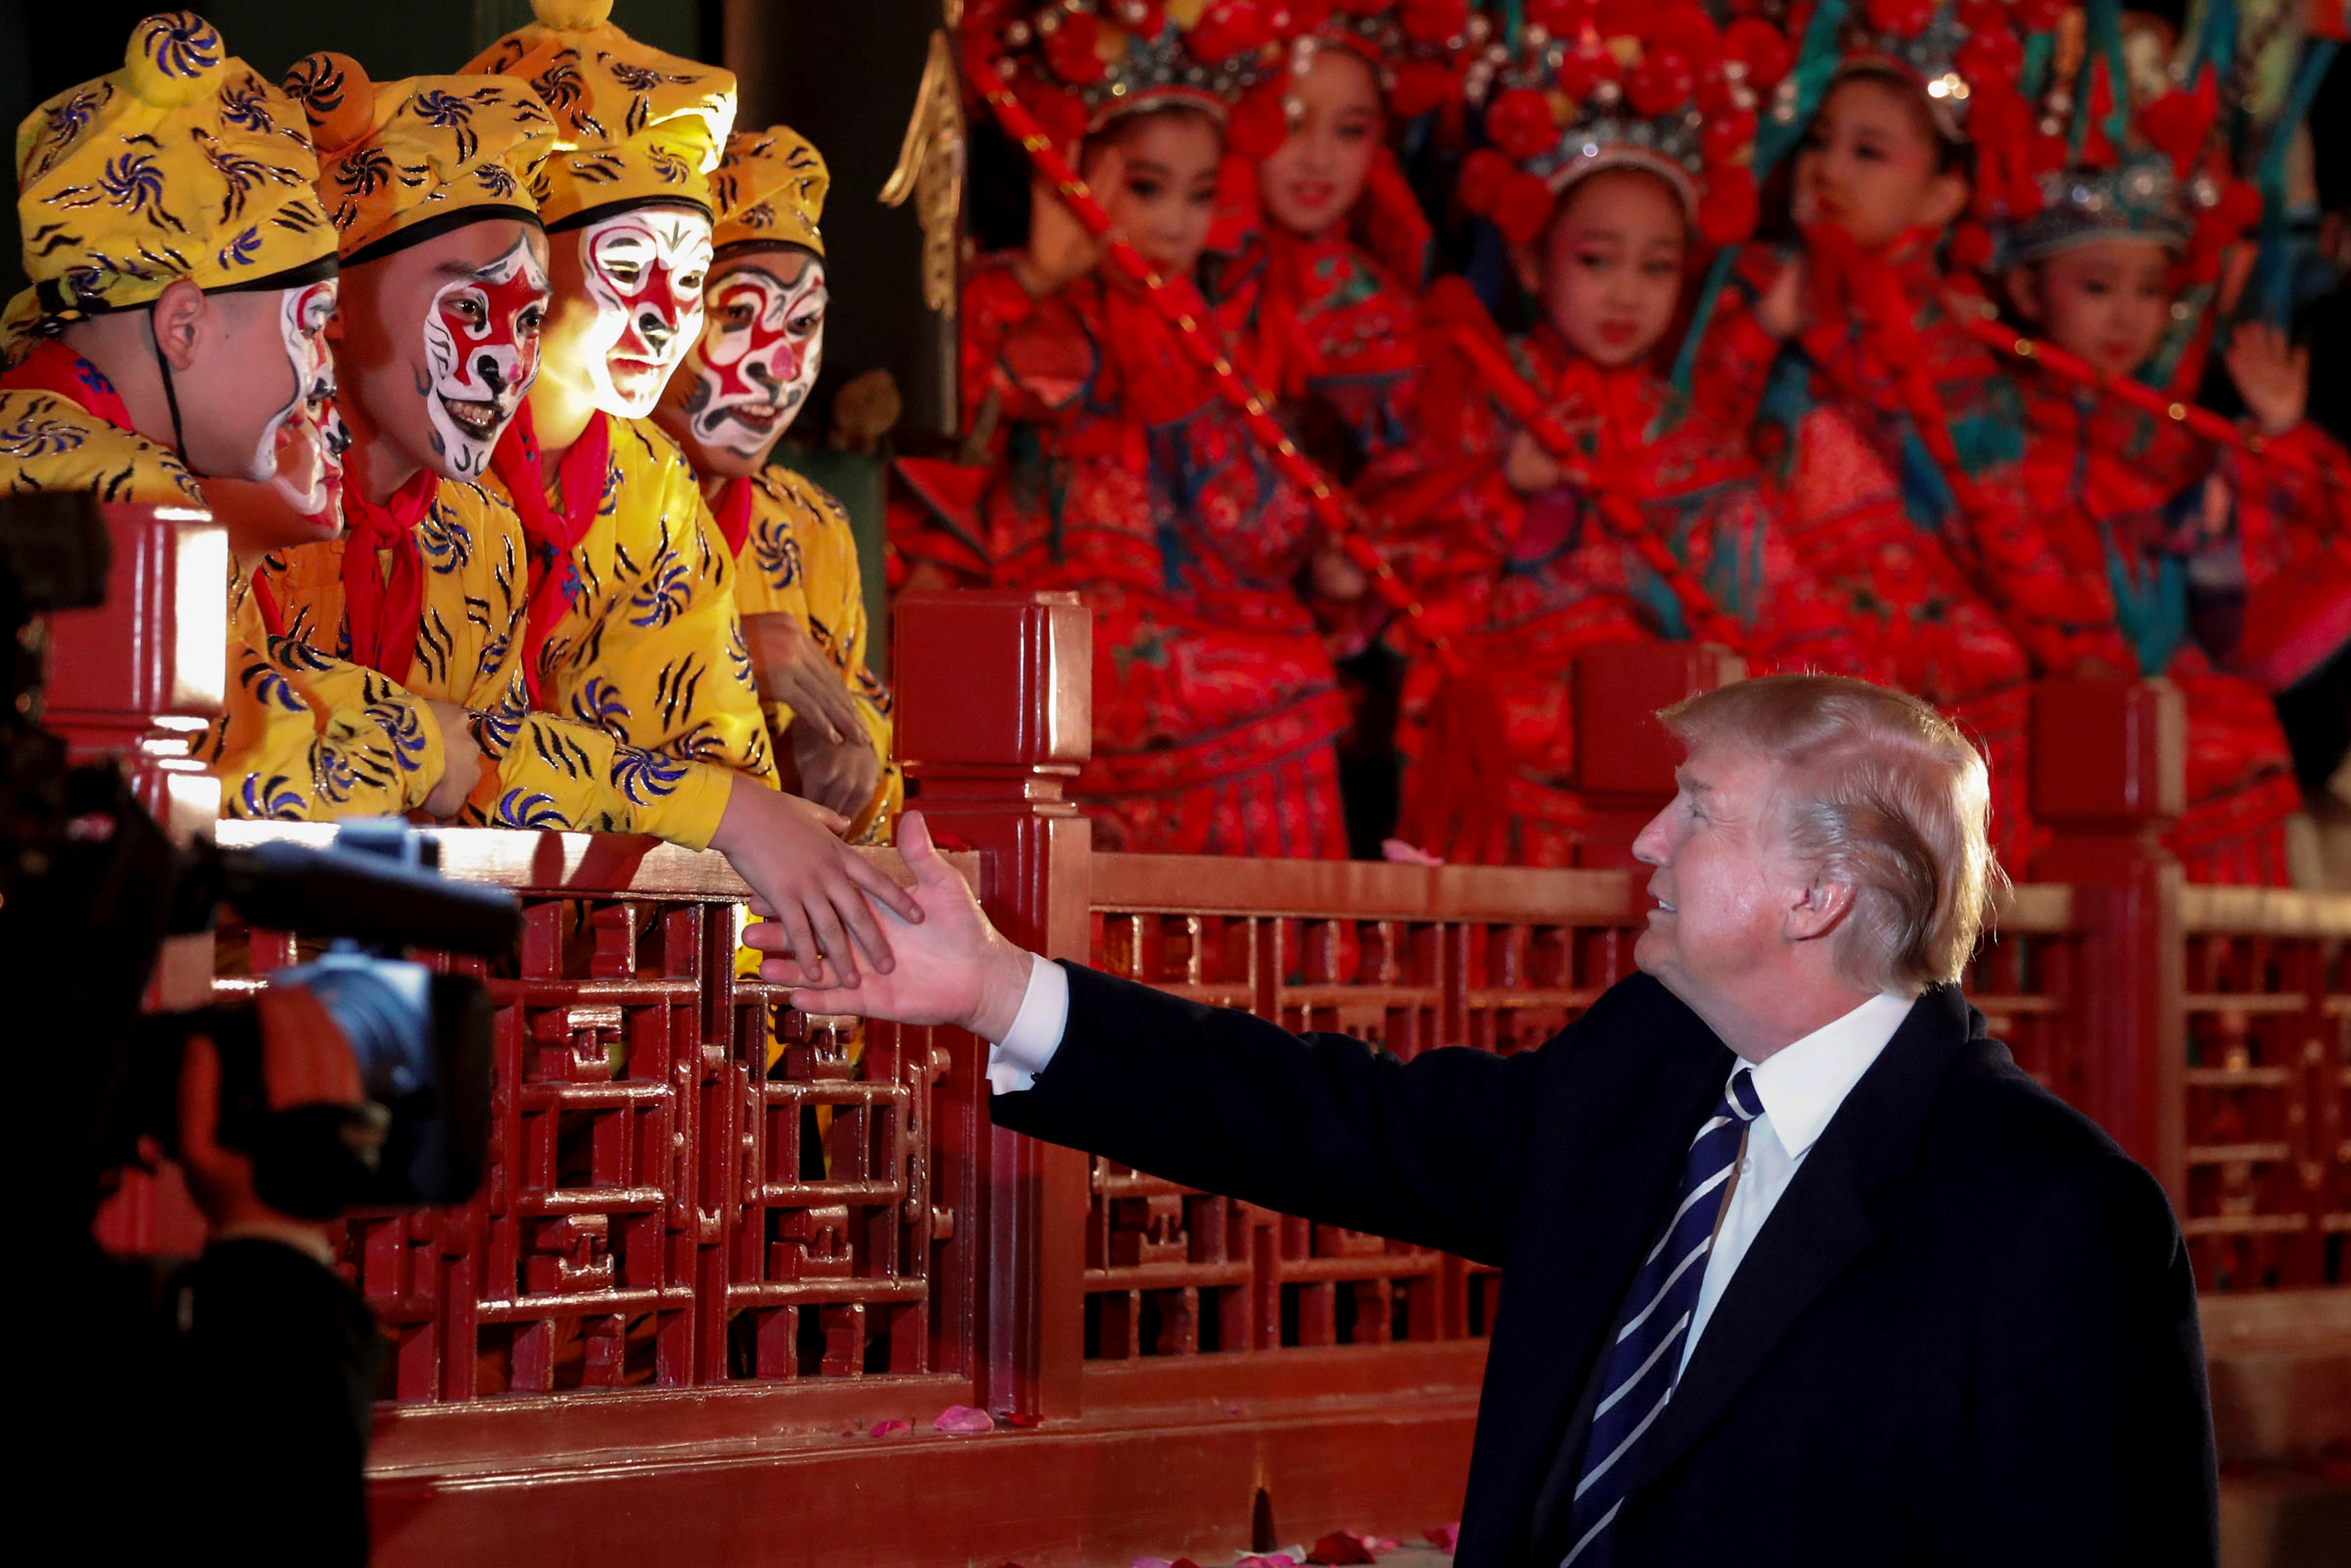 U.S. President Donald Trump shakes hands with opera performers at the Forbidden City in Beijing, China, on Nov. 8, 2017. (Jonathan Ernst—Reuters)